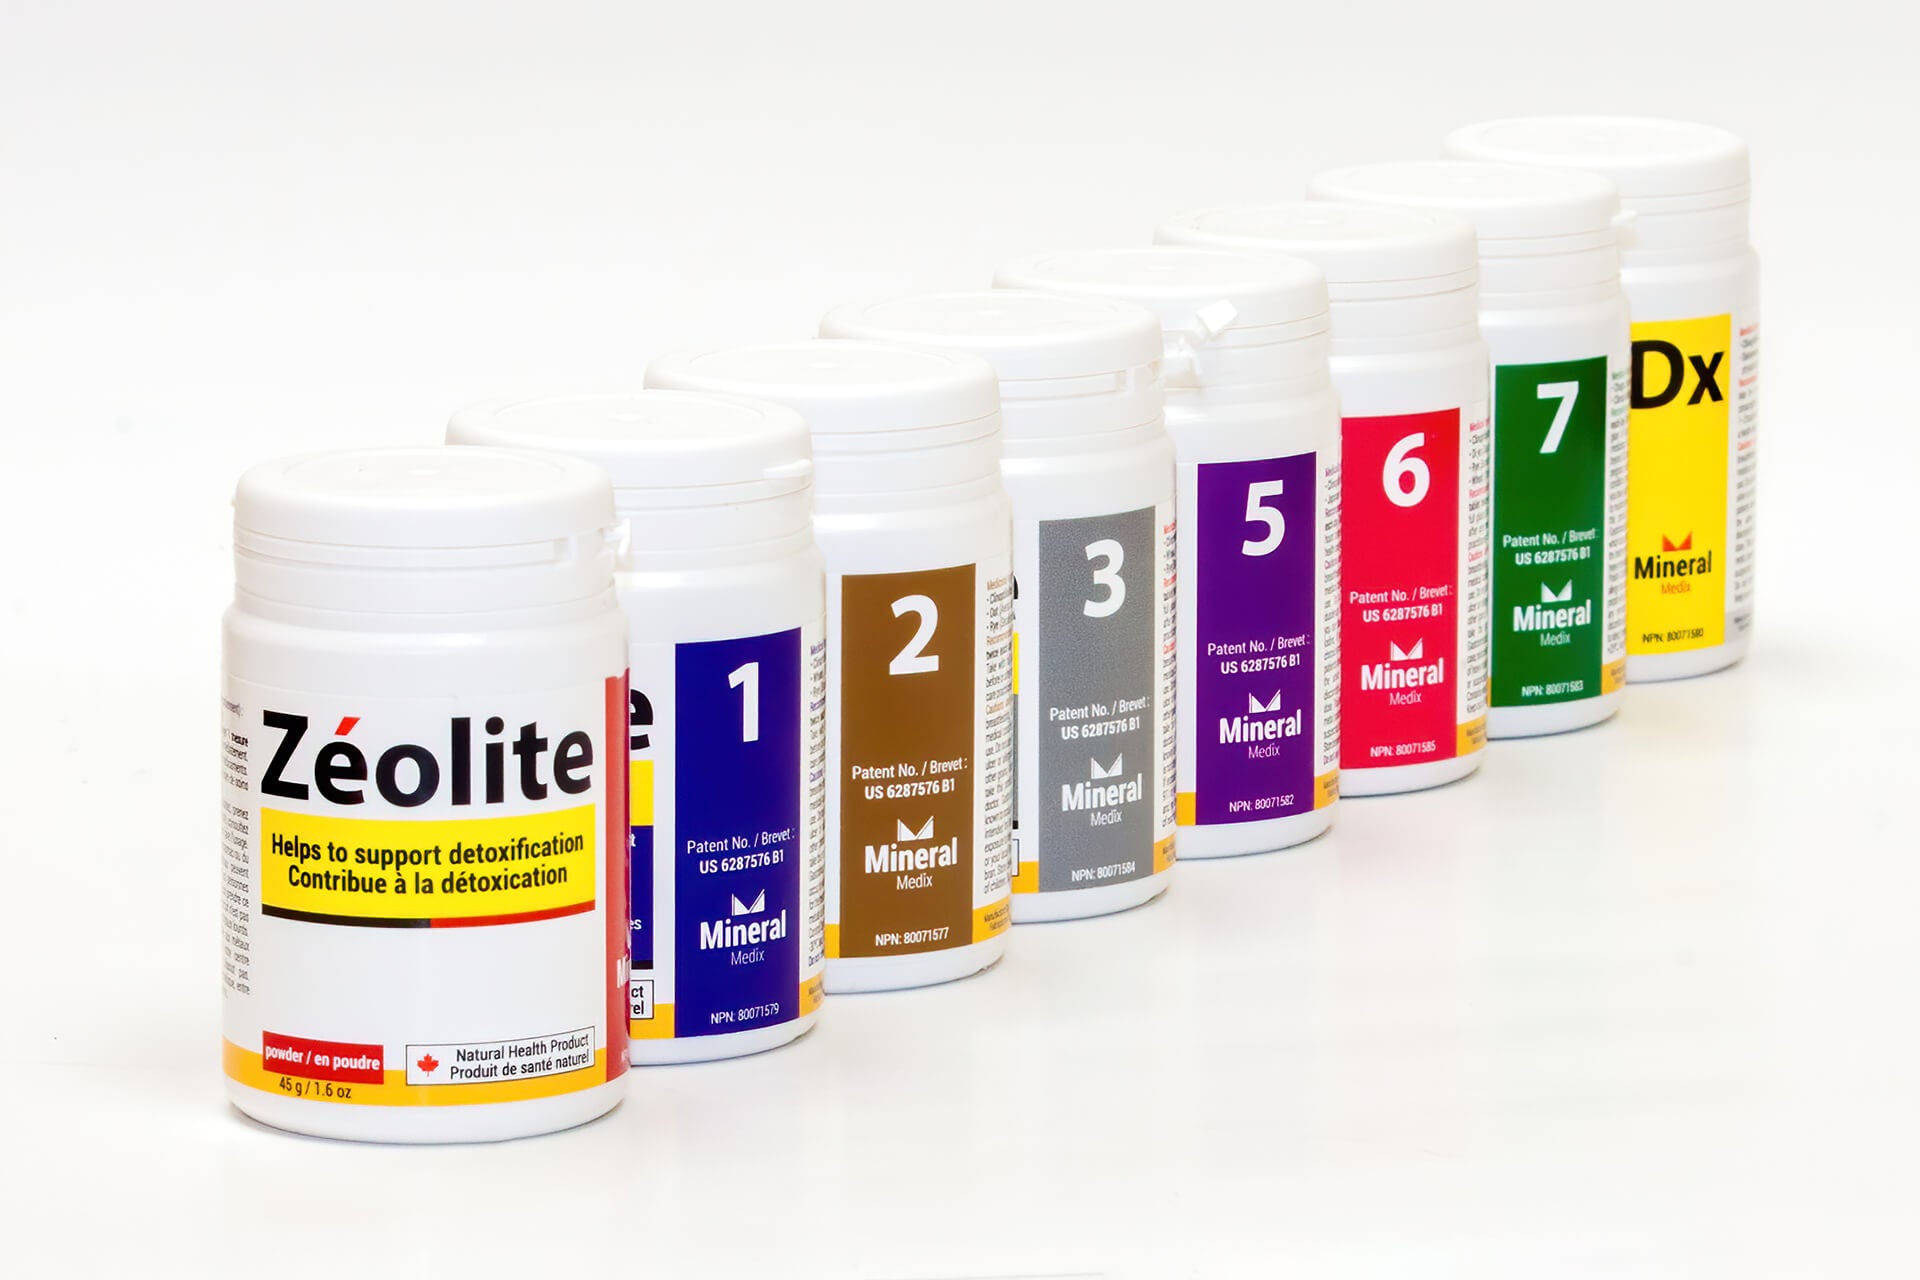 Zeolite product line by Mineral Medix